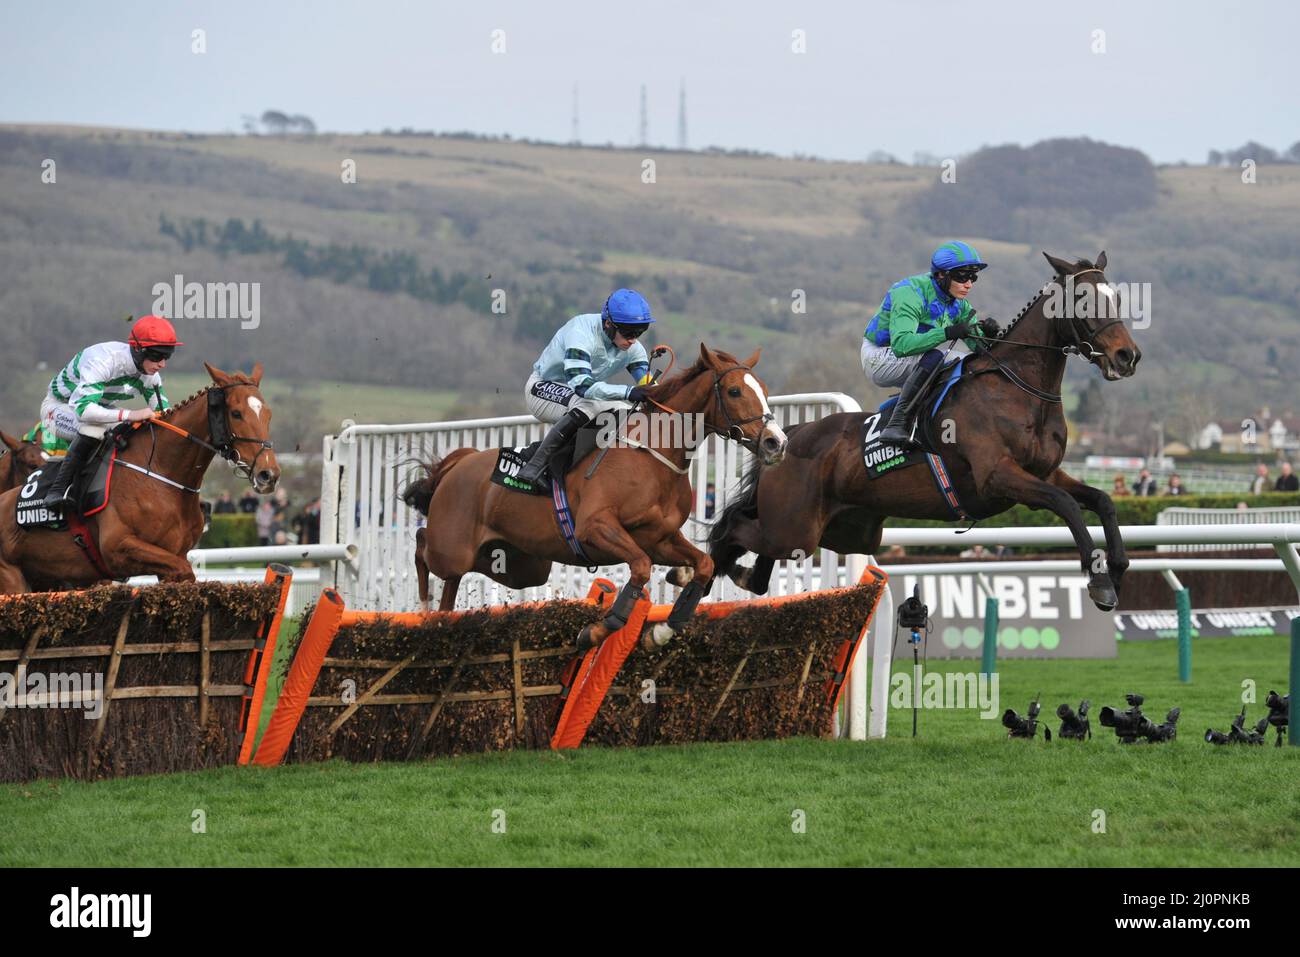 Day 1 of the Cheltenham Festival at Cheltenham Racecourse.    Champion Hurdle    Appreciate It ridden by Paul Townend leads on the first circuit Stock Photo